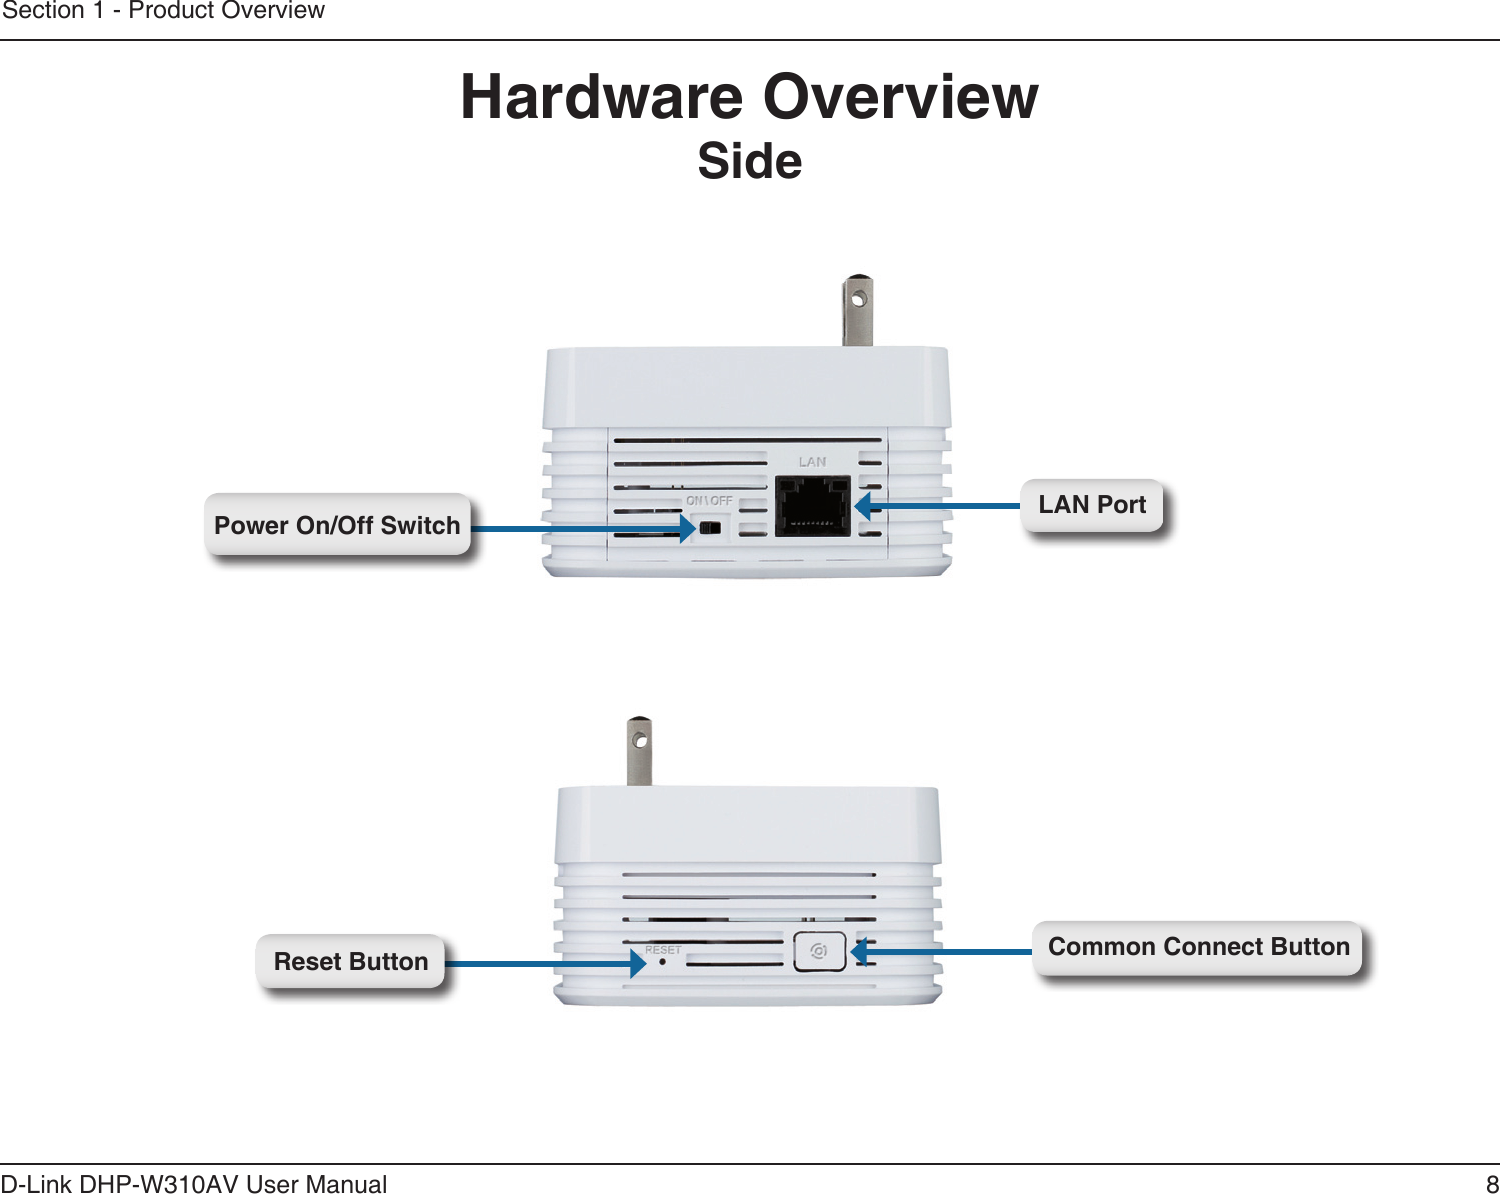 8D-Link DHP-W310AV User ManualSection 1 - Product OverviewHardware OverviewSideReset ButtonPower On/Off SwitchCommon Connect ButtonLAN Port